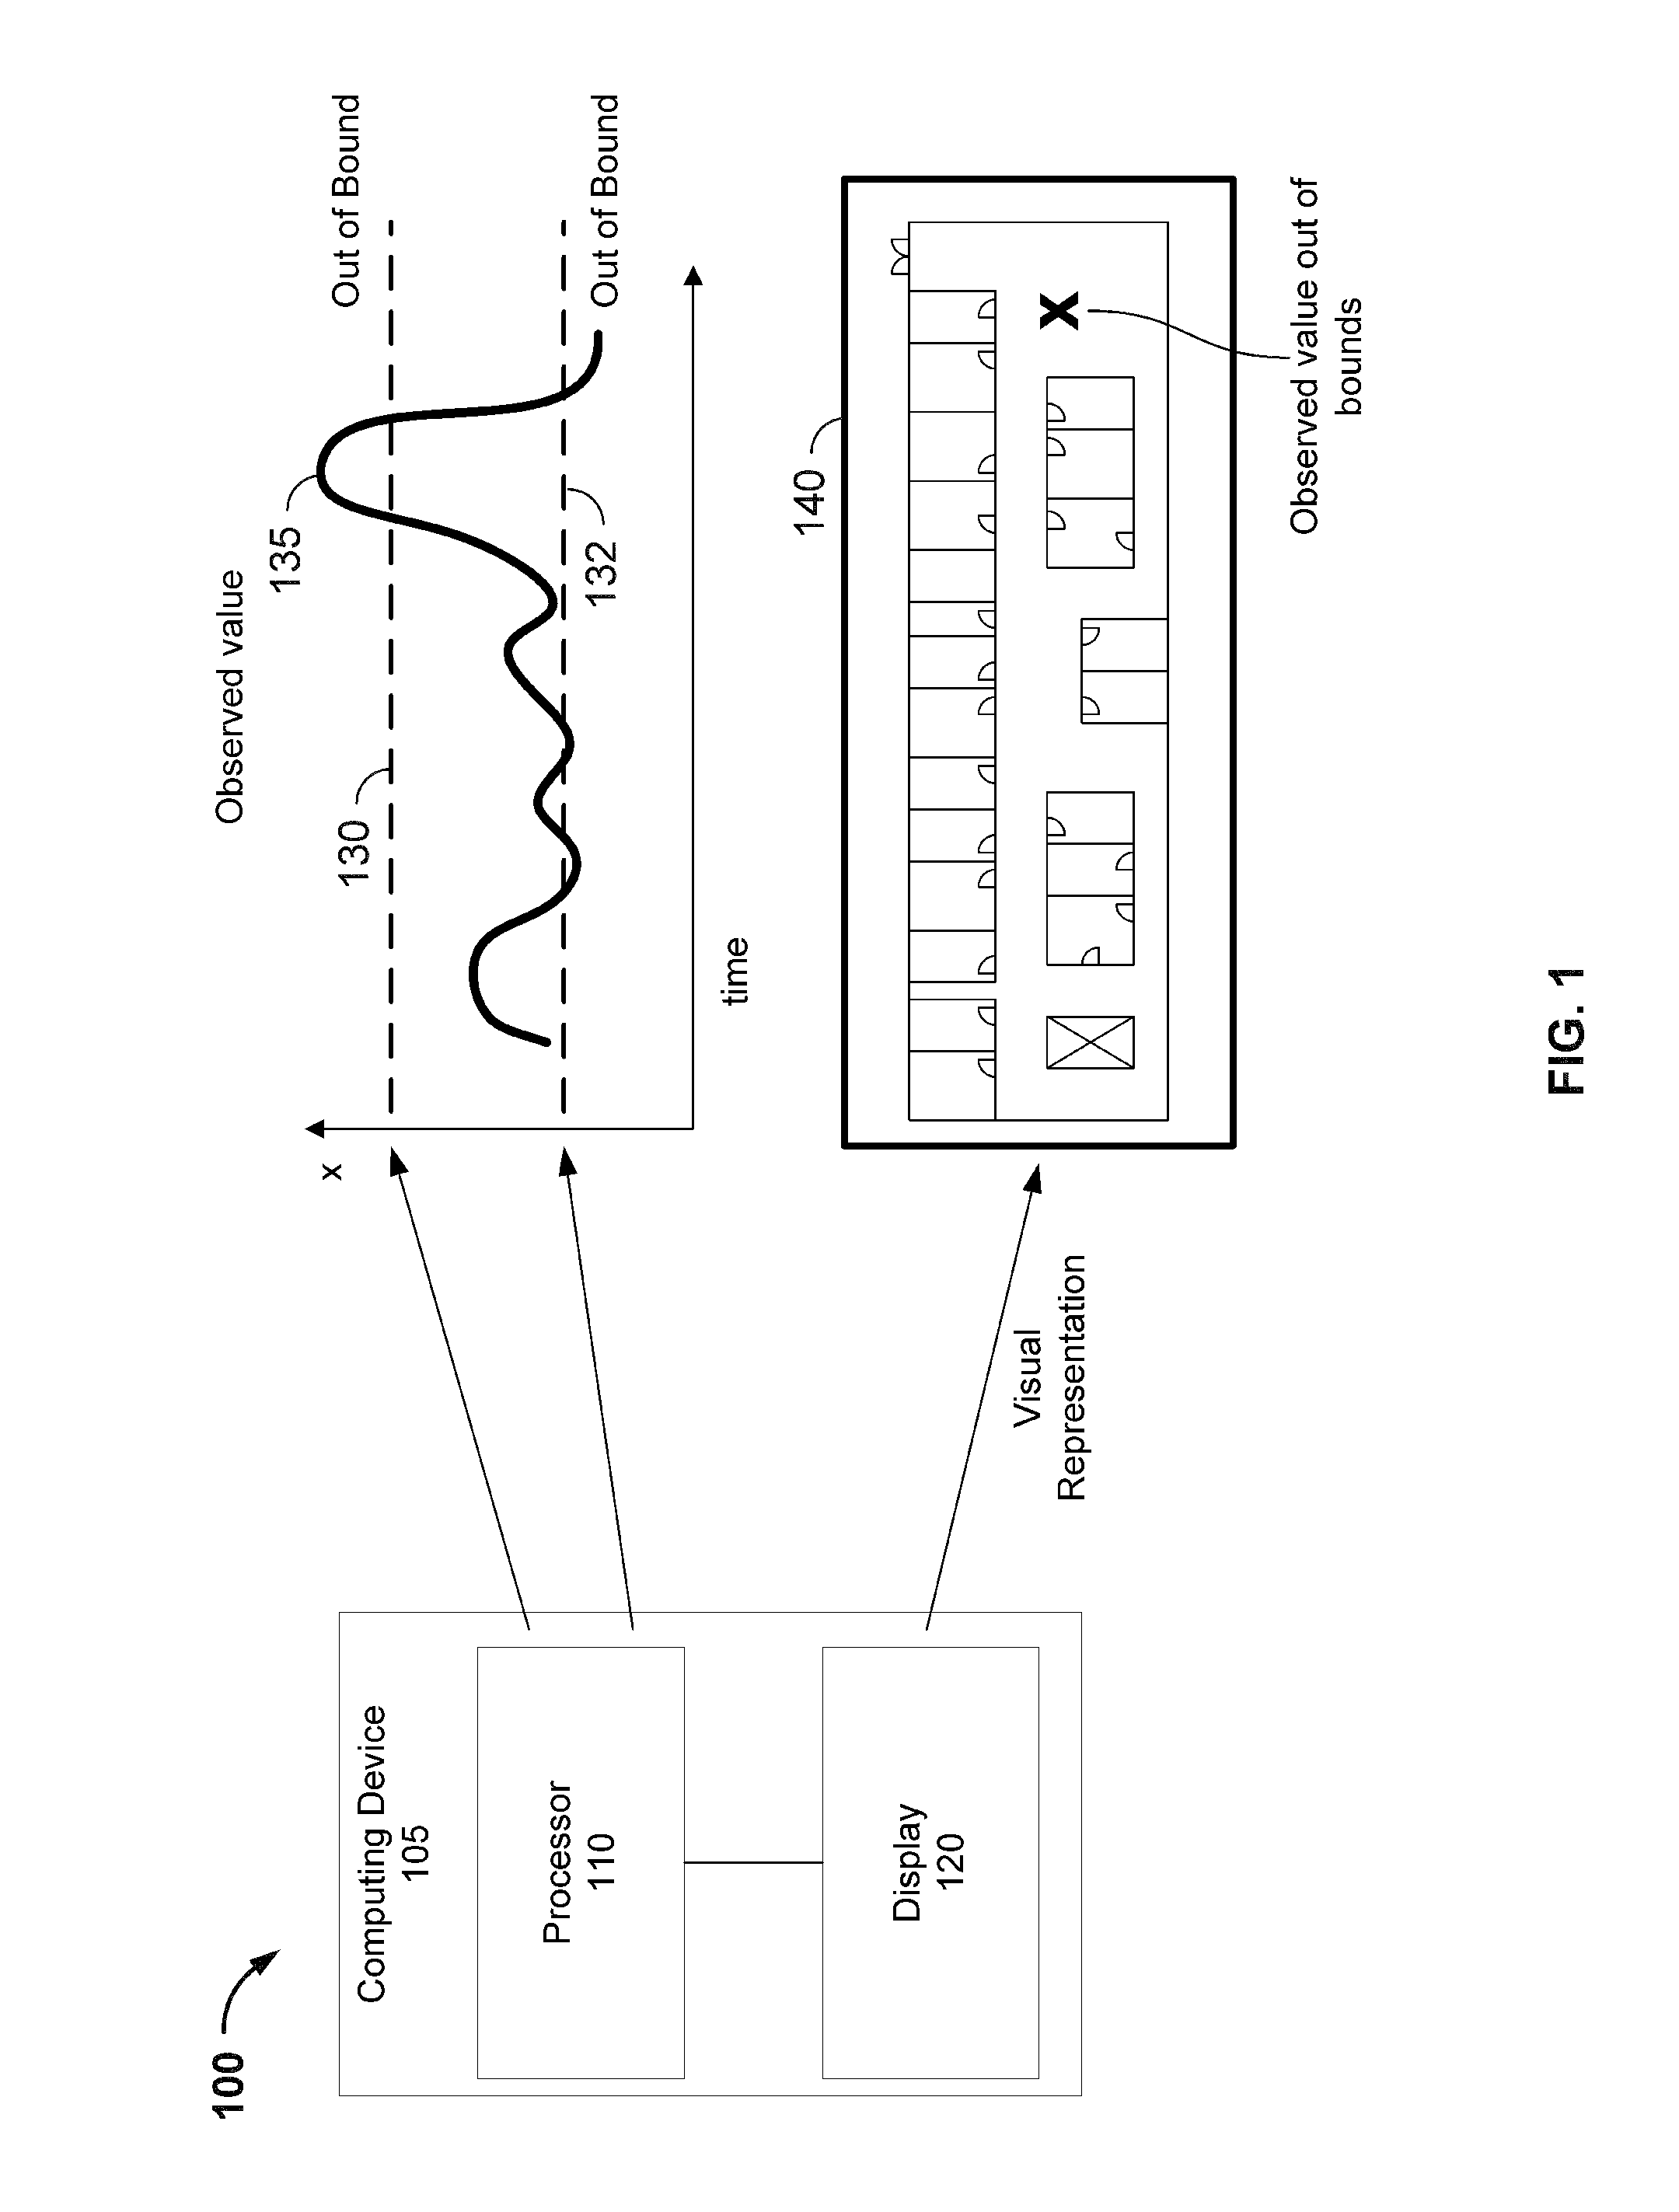 Building analysis systems and methods